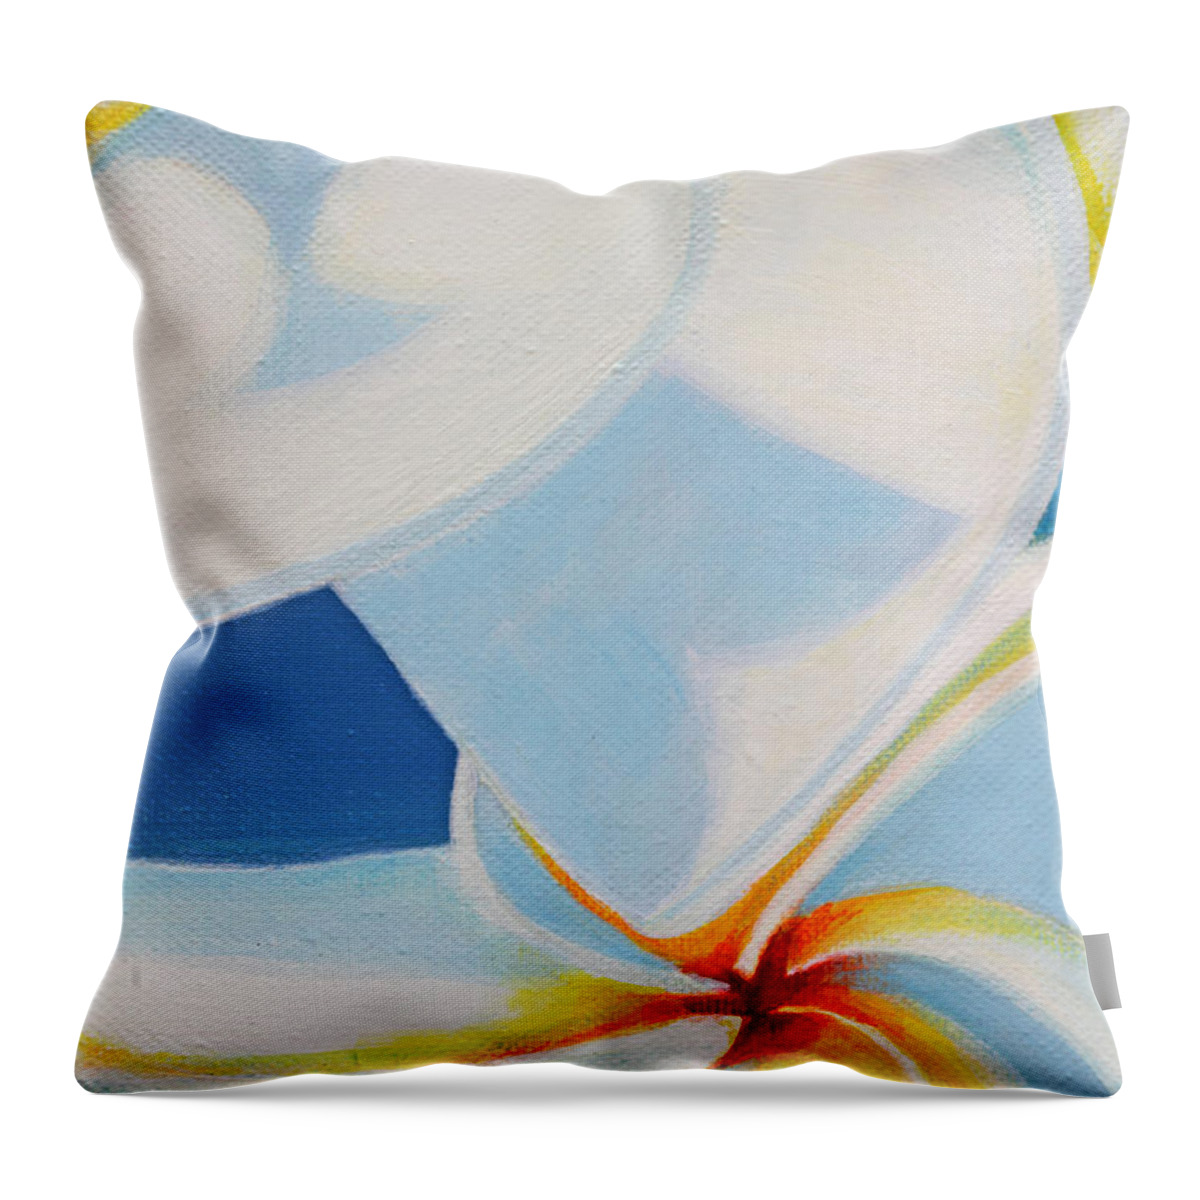 Floral Abstract Throw Pillow featuring the painting Plumeria by Kathleen Irvine